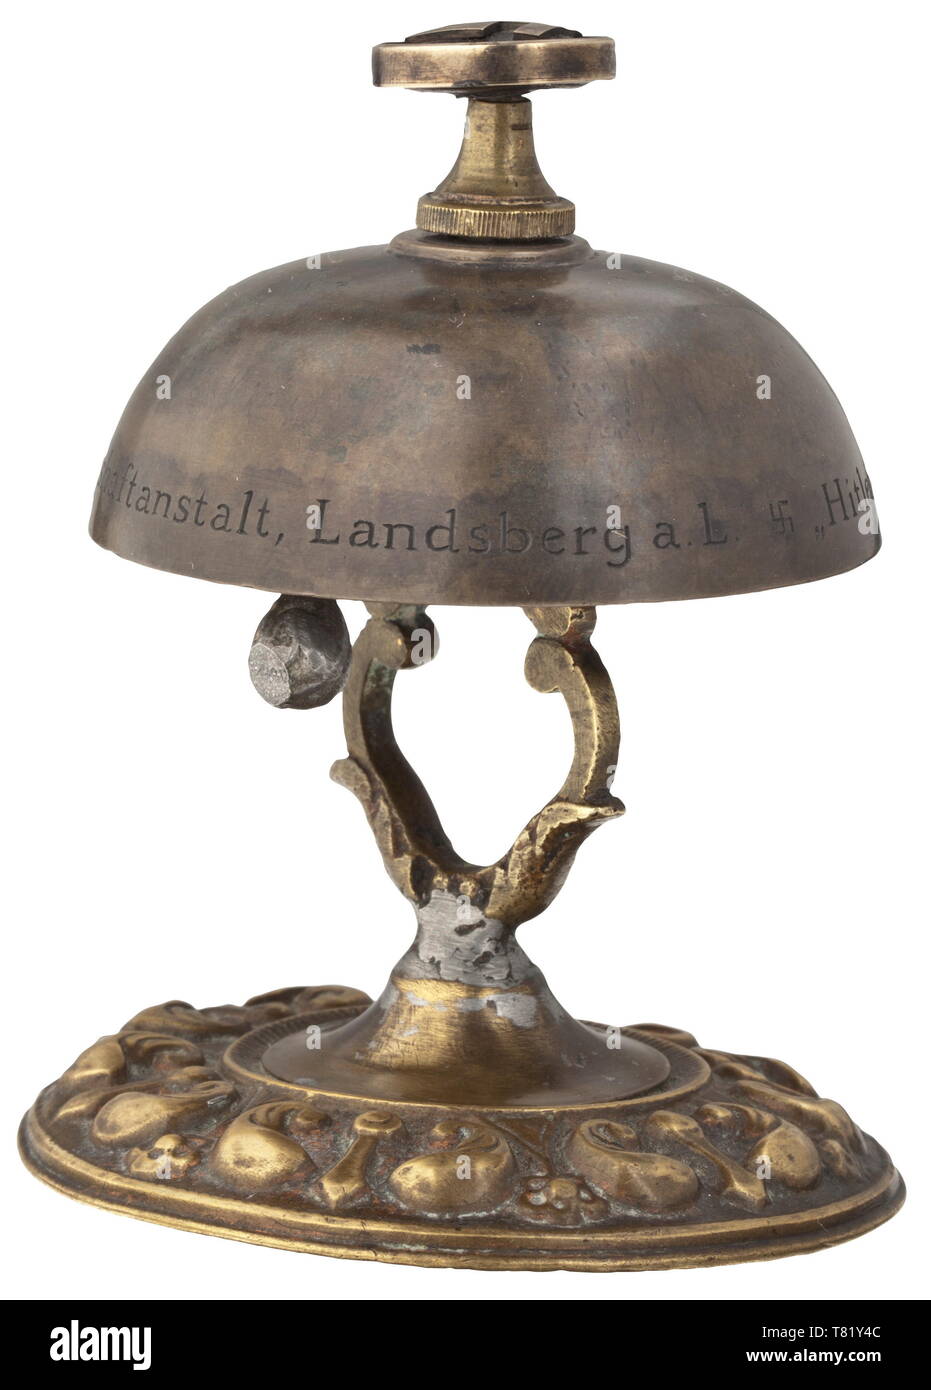 Adolf Hitler - a prison cell bell from fortress prison Landsberg on the Lech. An improvised gift made by his fellow inmates, of bronze parts of varying age, with a swastika bell push. The bell is engraved 'Hitlerglocke' aus der Strafzelle No. 7 Festungshaftanstalt Landsberg a.L. ("Hitler Bell" from penal cell no. 7 fortress prison Landsberg on the Lech). Height ca. 9 cm. historic, historical, 20th century, 1930s, NS, National Socialism, Nazism, Third Reich, German Reich, Germany, German, National Socialist, Nazi, Nazi period, fascism, Editorial-Use-Only Stock Photo